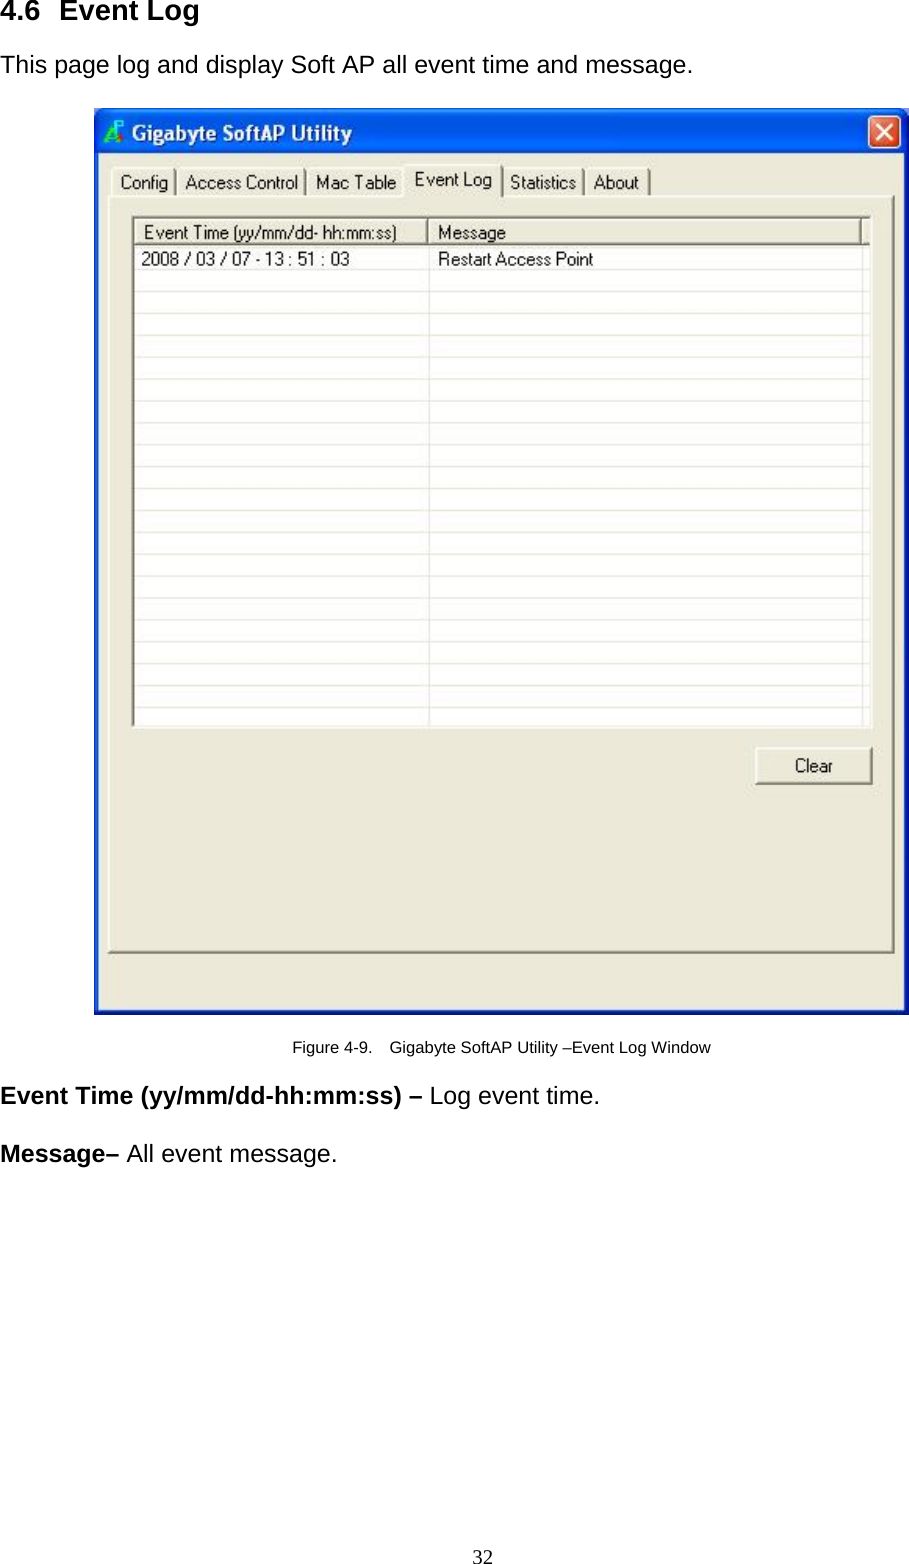 4.6 Event Log  This page log and display Soft AP all event time and message.    Figure 4-9.    Gigabyte SoftAP Utility –Event Log Window  Event Time (yy/mm/dd-hh:mm:ss) – Log event time.  Message– All event message.   32   